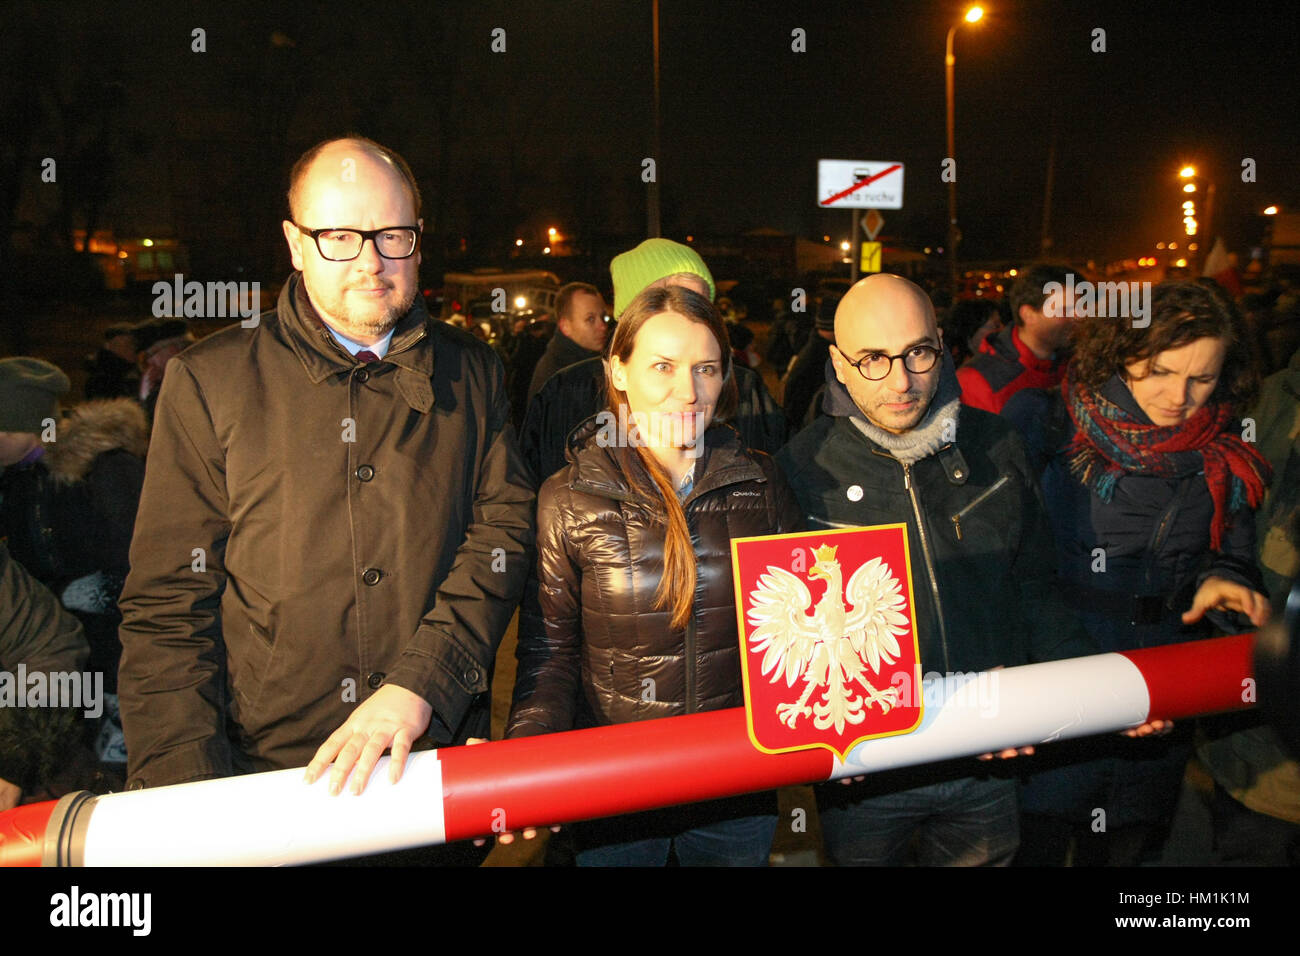 Gdansk, Poland. 31st Jan, 2017. pawel Adamowicz (L) Agnieszka Pomaska (C) Polish parliament member and Radomir Szumelda (R) holding symbolic border barrier are seen outside the Second World War Museum on 31 January 2017 in Gdansk, Poland. Protest was organized by KOD movement against Poland's nationalist government plans to reshape the Museum's permanent exhibition into a display more focused on Poland's experience of the conflict. Museum is expected to open to the public on February 2017, is to place the war in broader international context. Credit: Michal Fludra/Alamy Live News Stock Photo